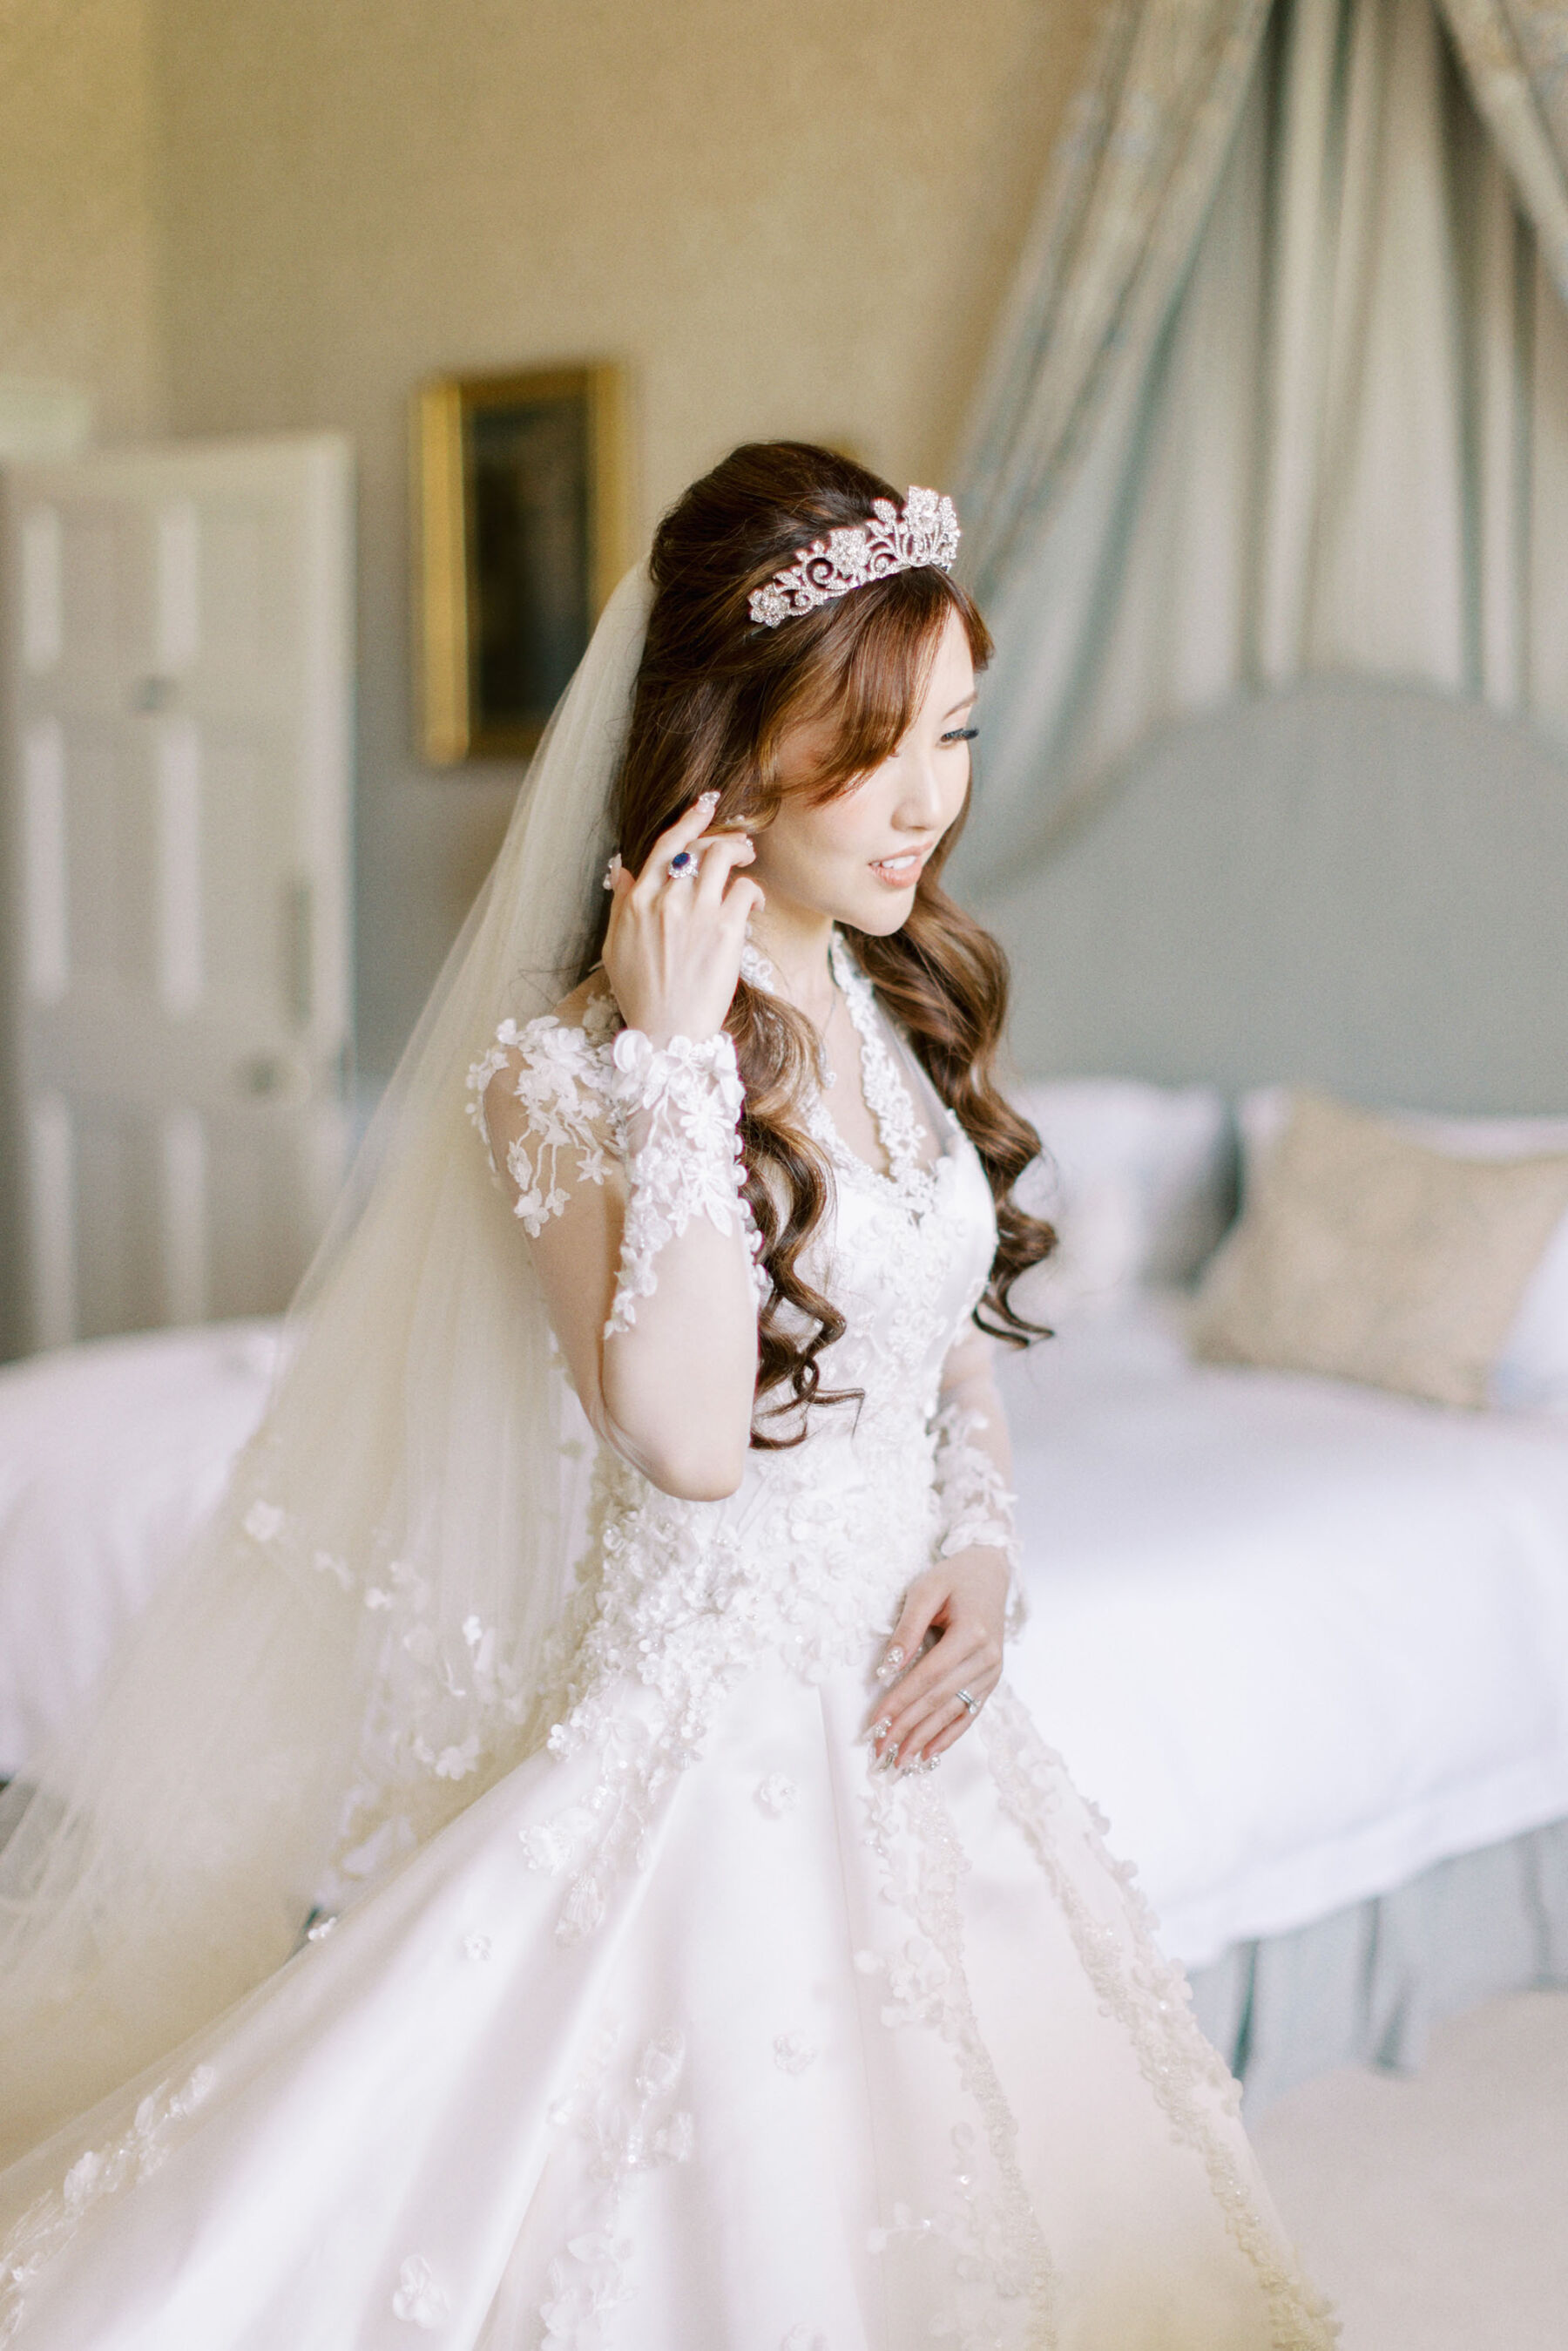 Floral lace wedding dress by Sally Bean Couture.